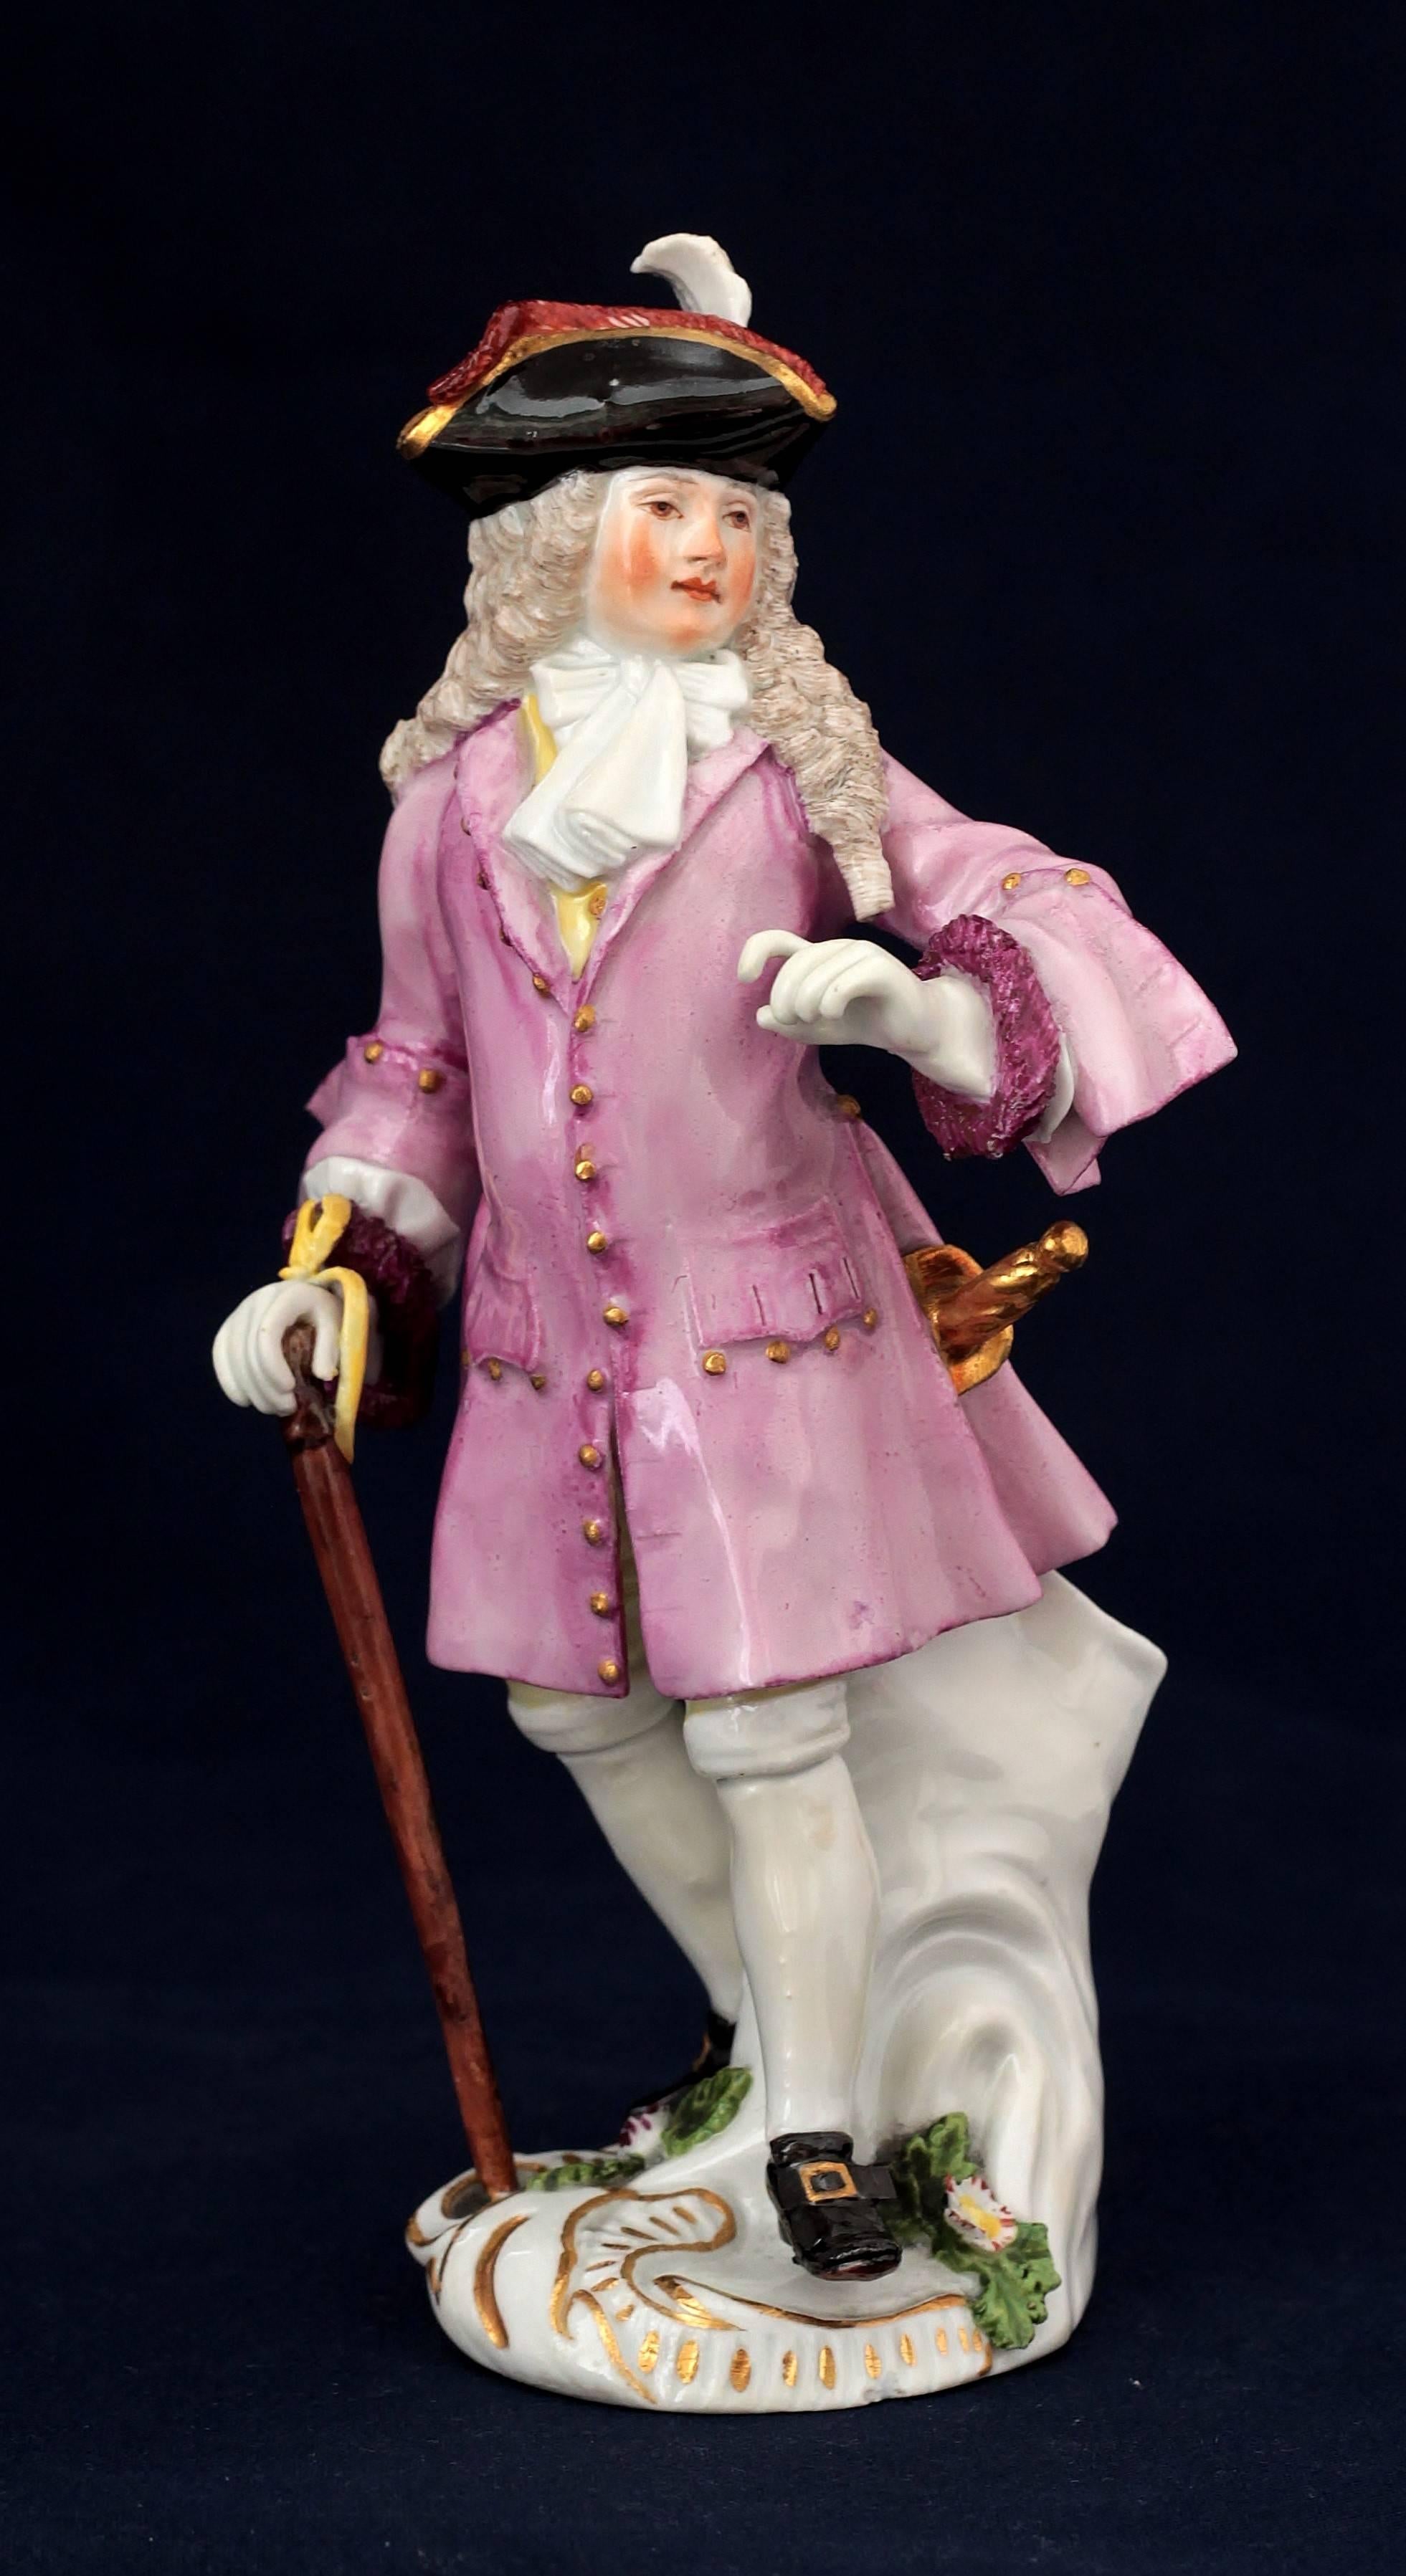 Meissen porcelain figure of The Squire of Alsatia, street traders of London. Model by J.J. Kaendler and P. Reinicke, circa 1754.
Sword-mark in blue on the plinth, scratch-mark “9” under the plinth.
Measures: Height: 14.4 cm, diameter: 8.3